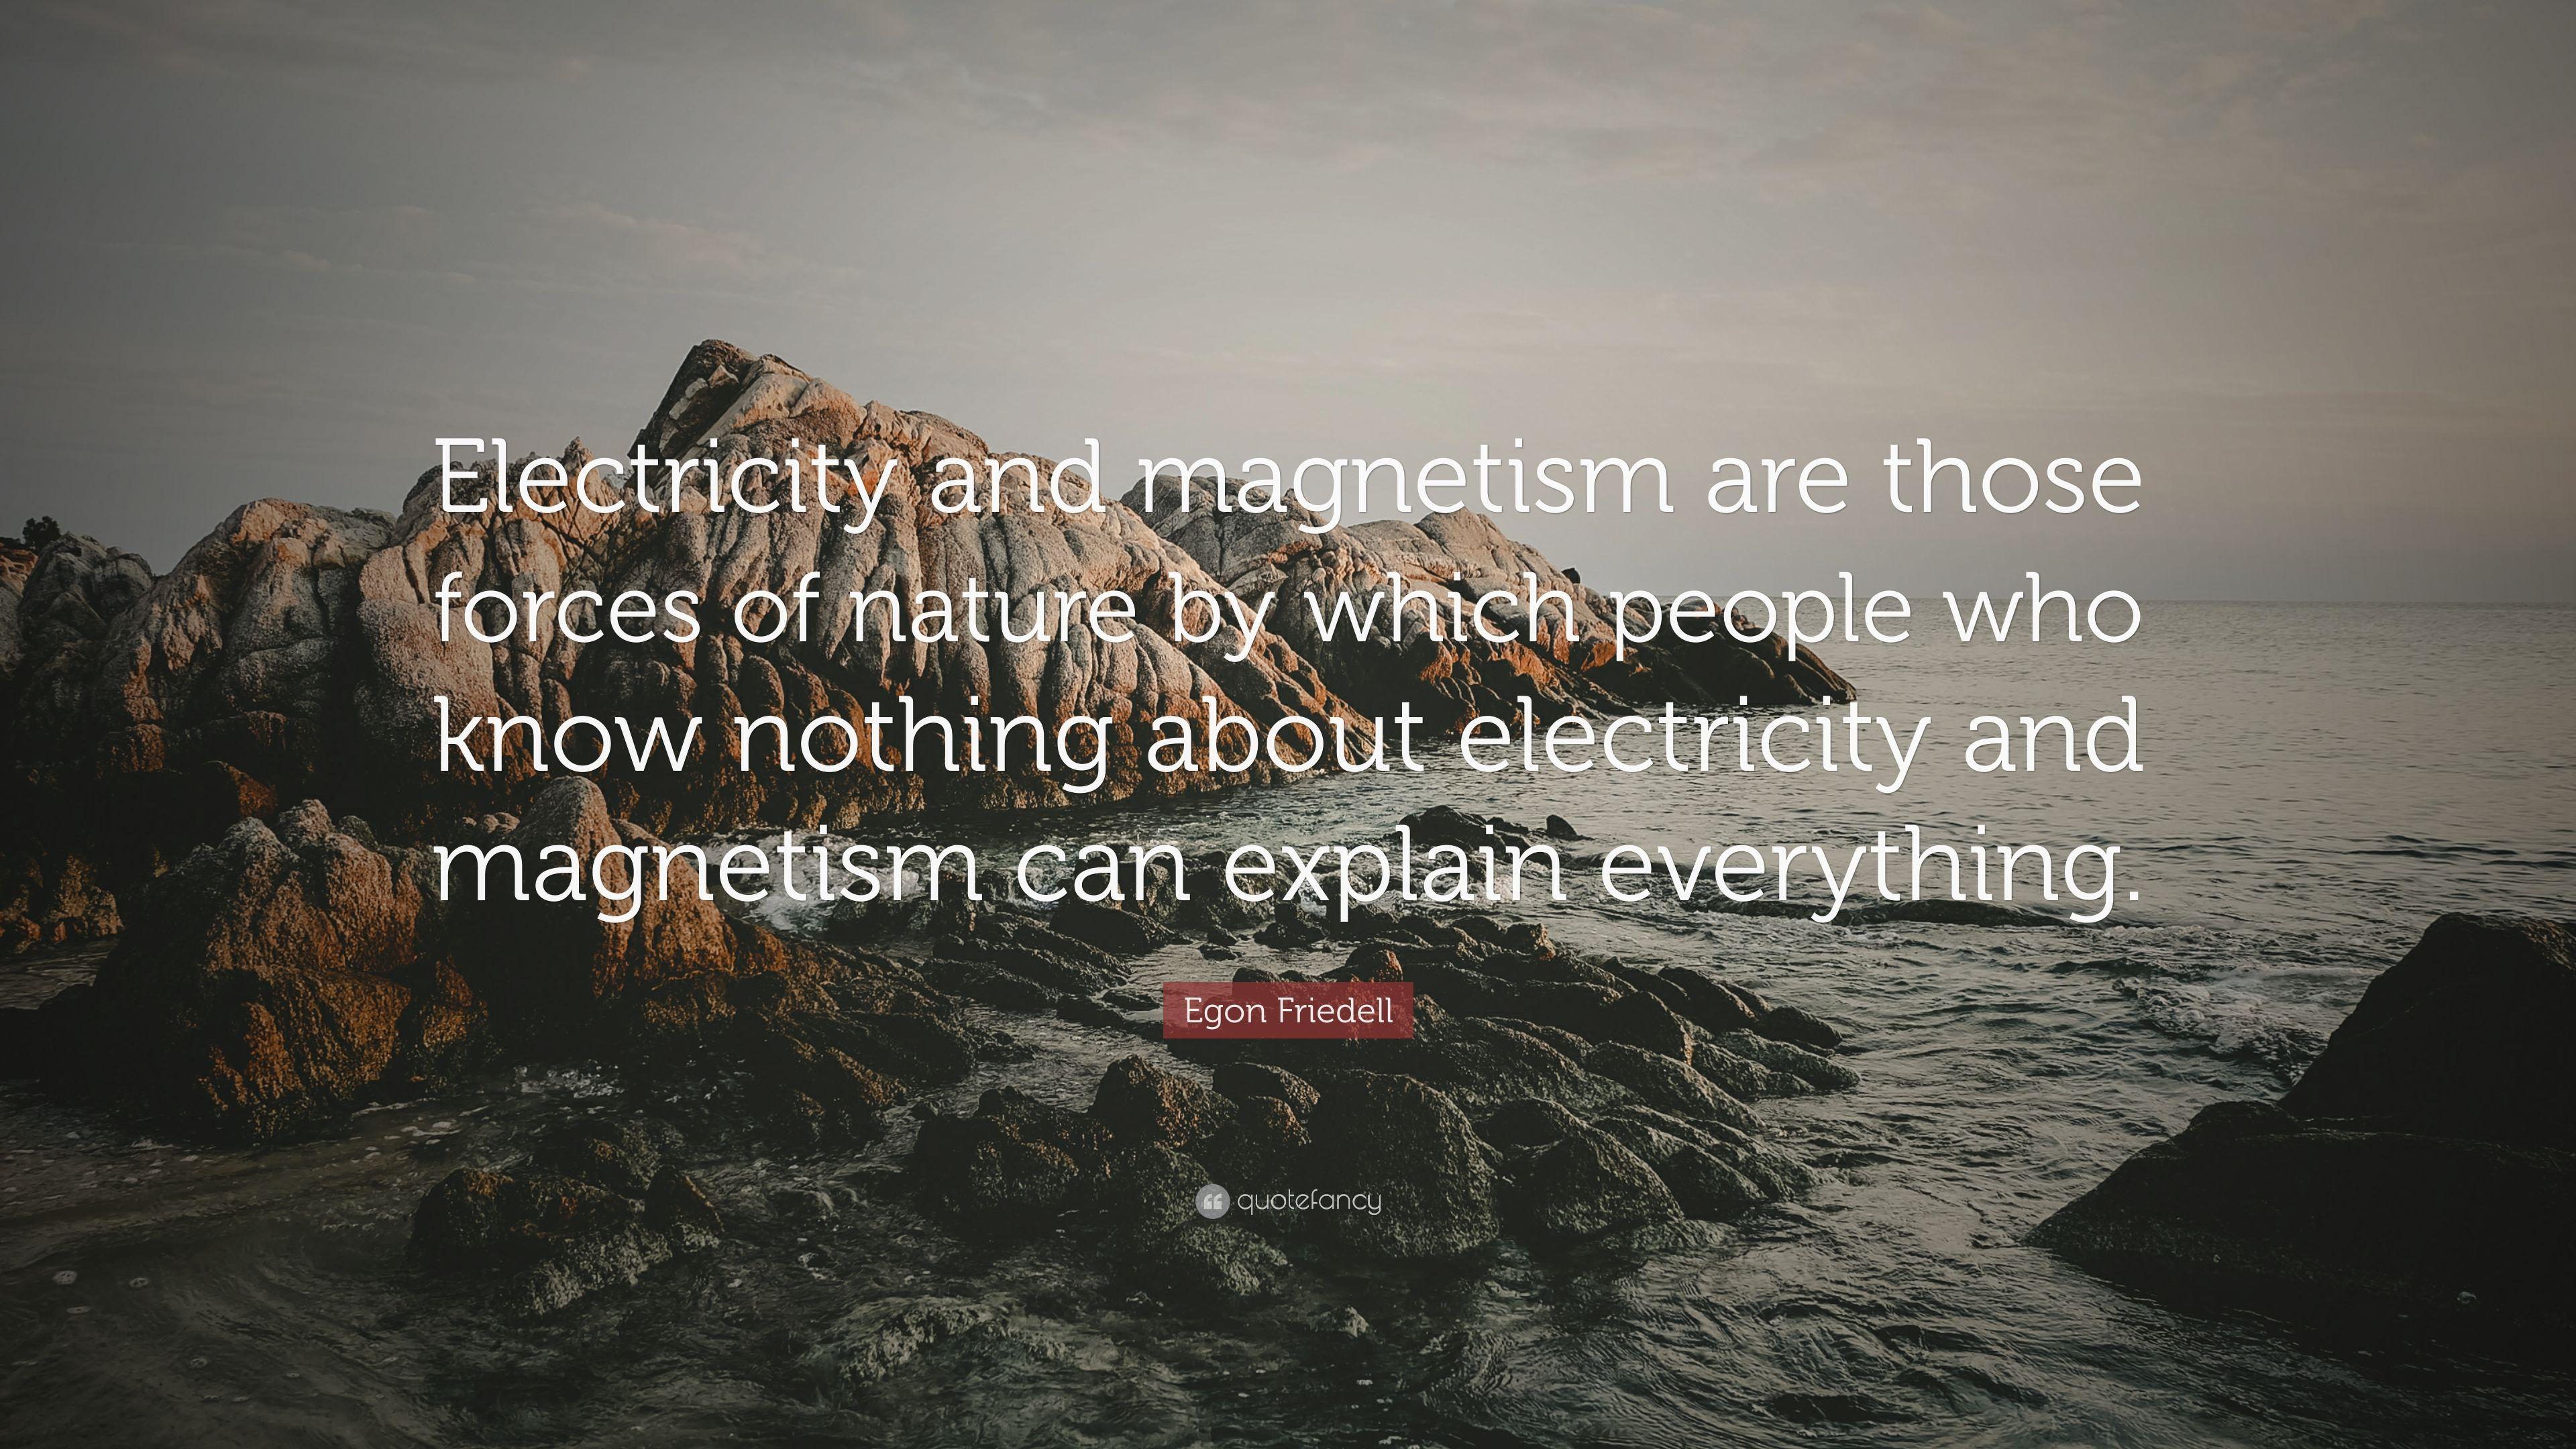 Egon Friedell Quote: “Electricity and magnetism are those